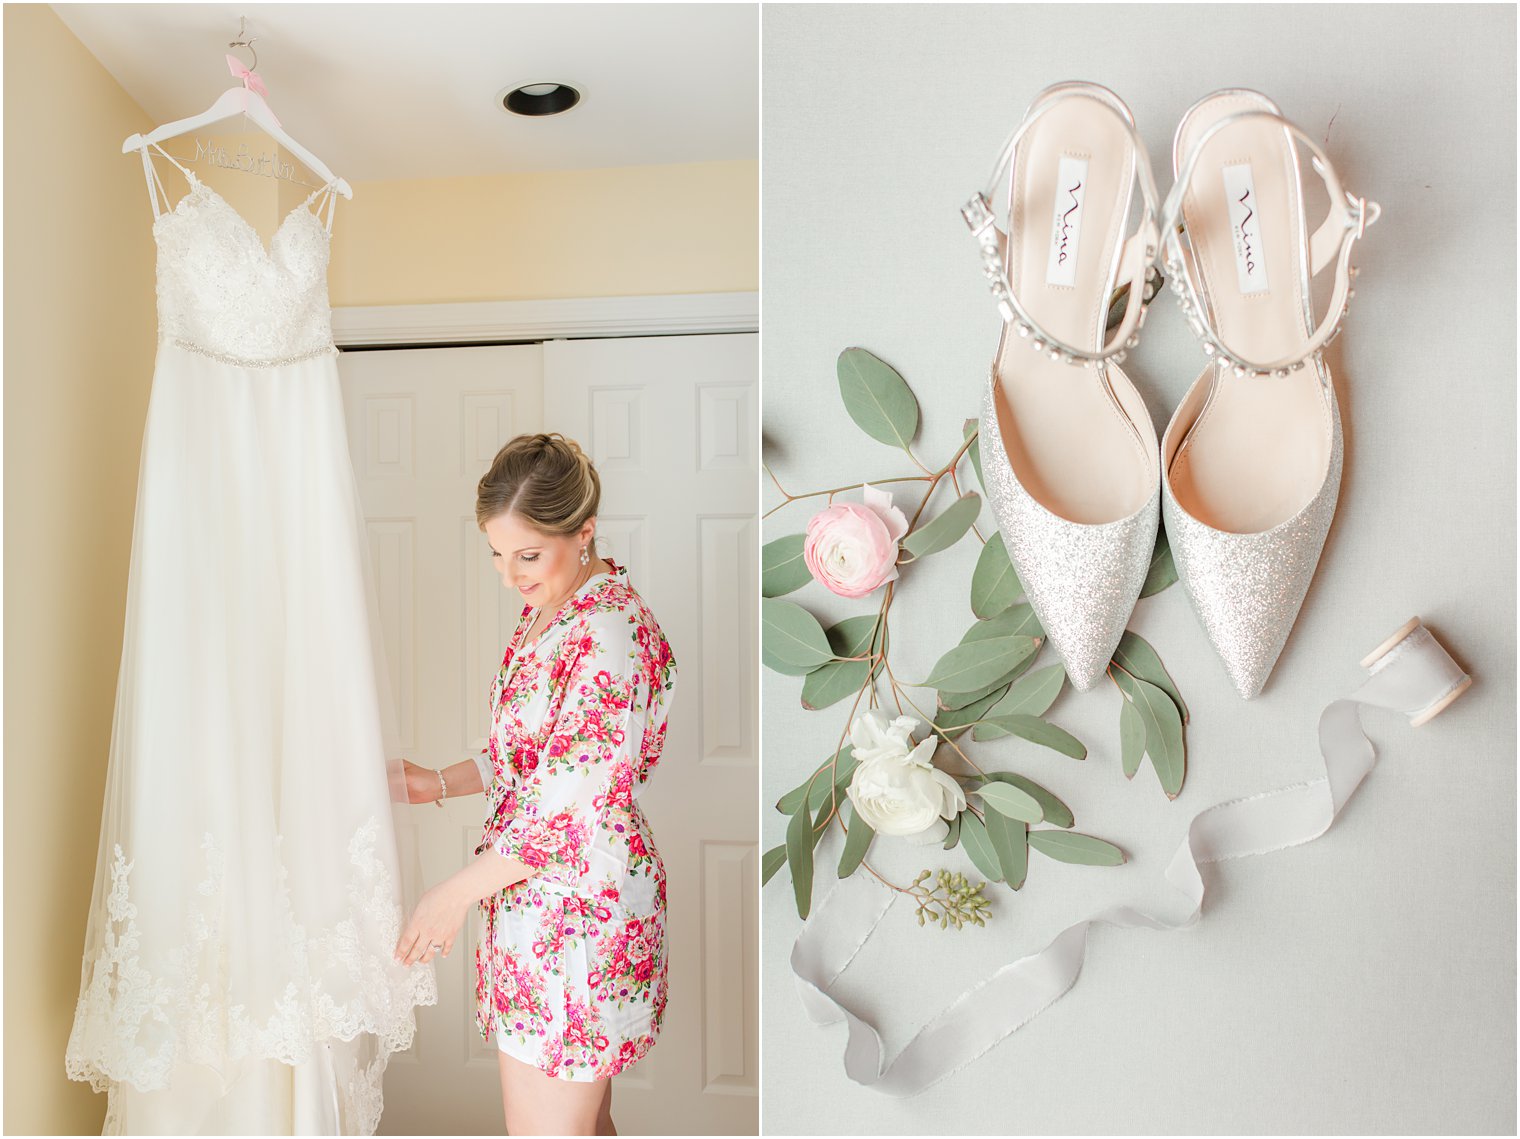 Bride getting ready on wedding morning with wedding dress and Nina bridal shoes